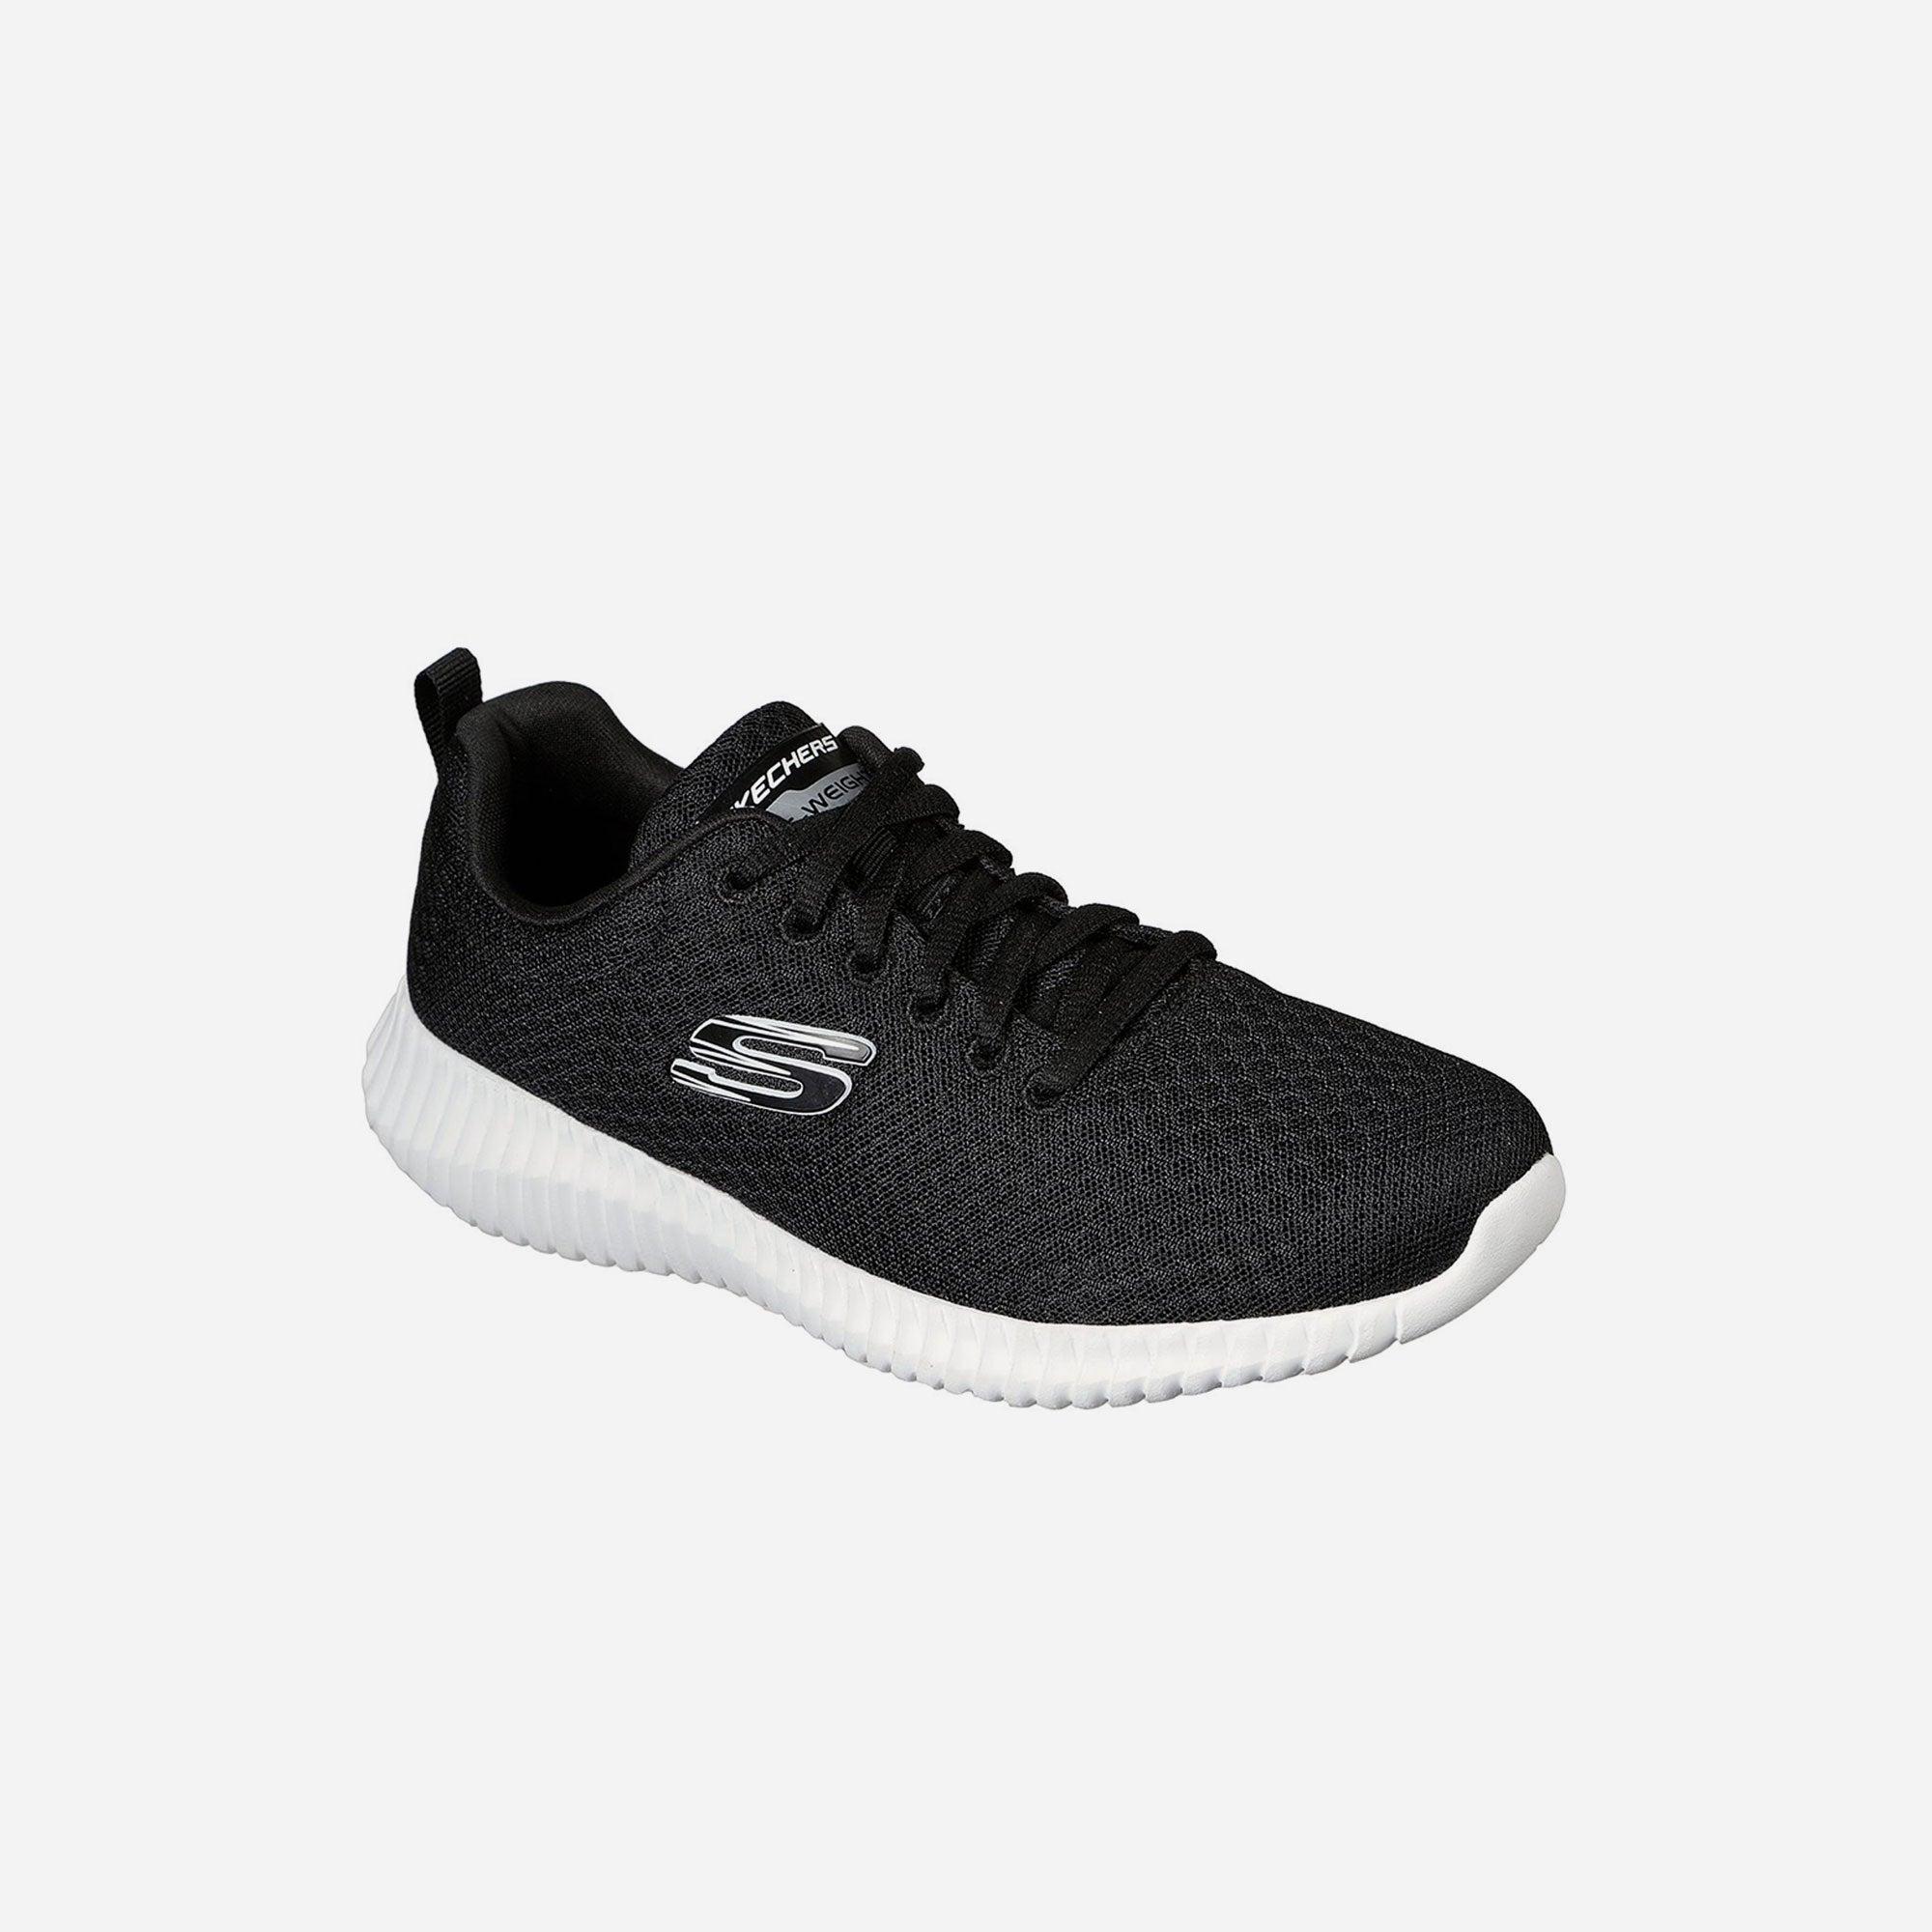 Giày thể thao nữ Skechers Social Muse - 8730031-BKW